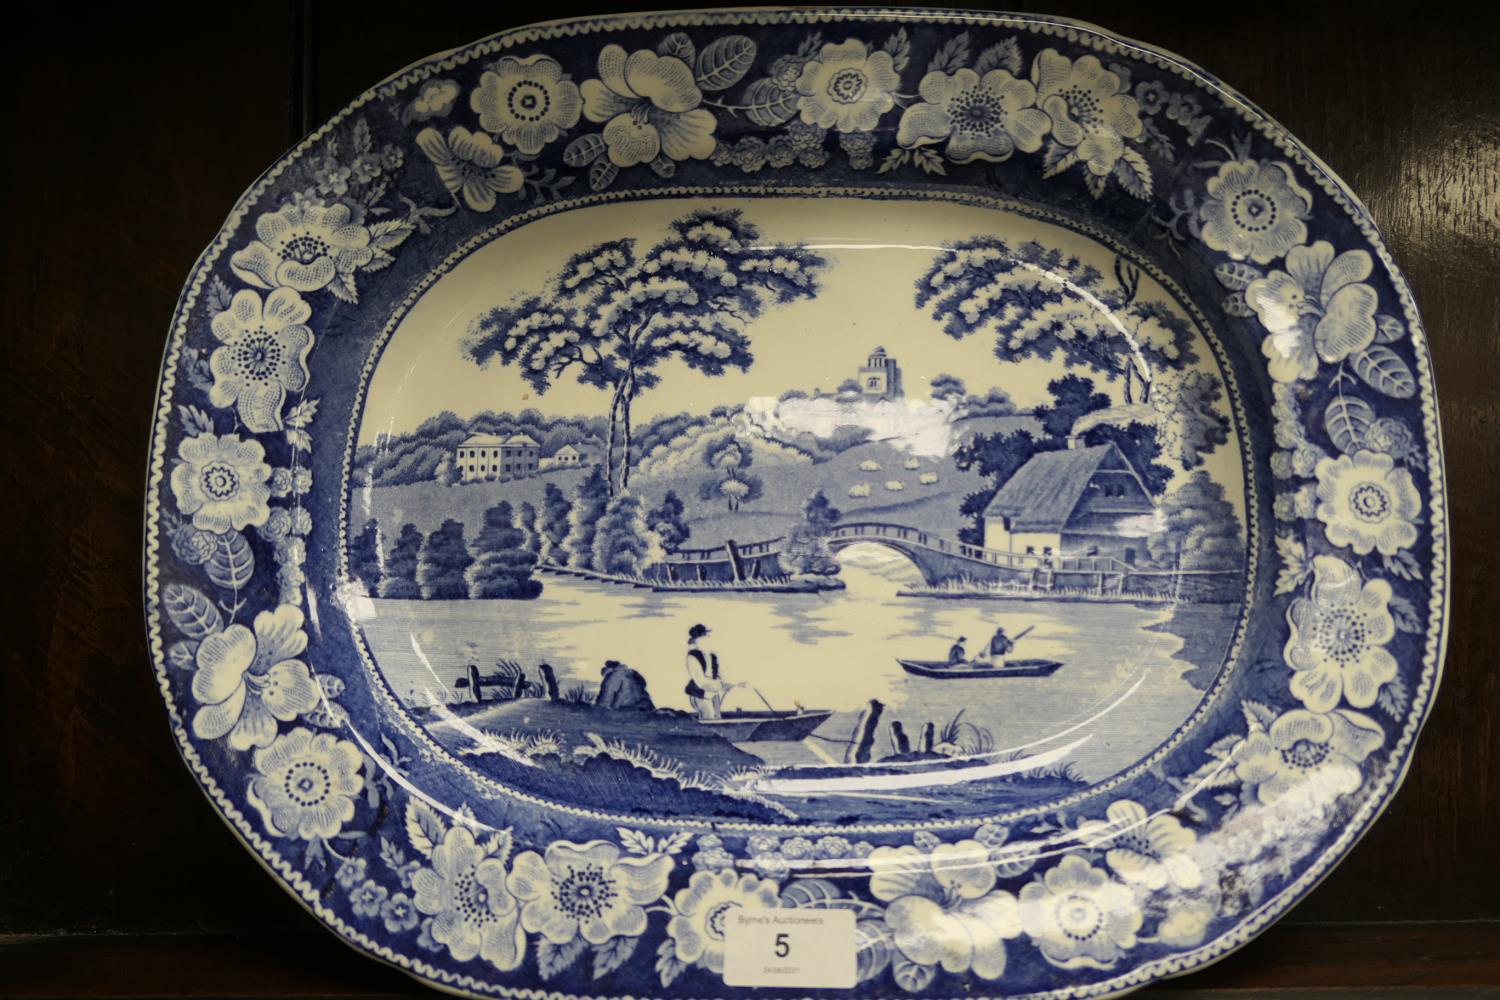 Matched pair of Staffordshire blue and white printware meat plates, circa 1830-50, in the Wild - Image 2 of 3